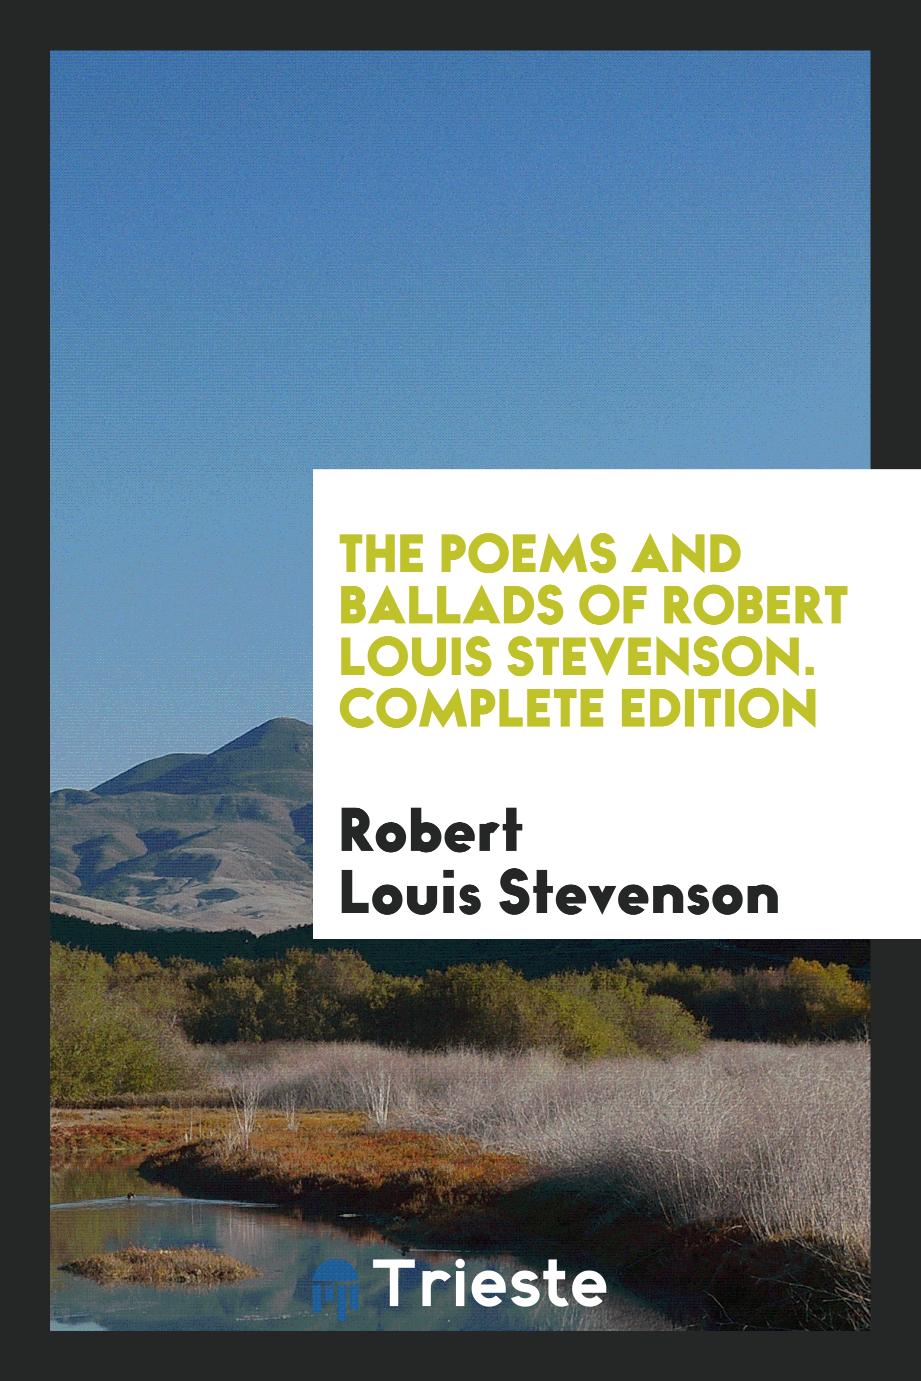 The Poems and Ballads of Robert Louis Stevenson. Complete Edition